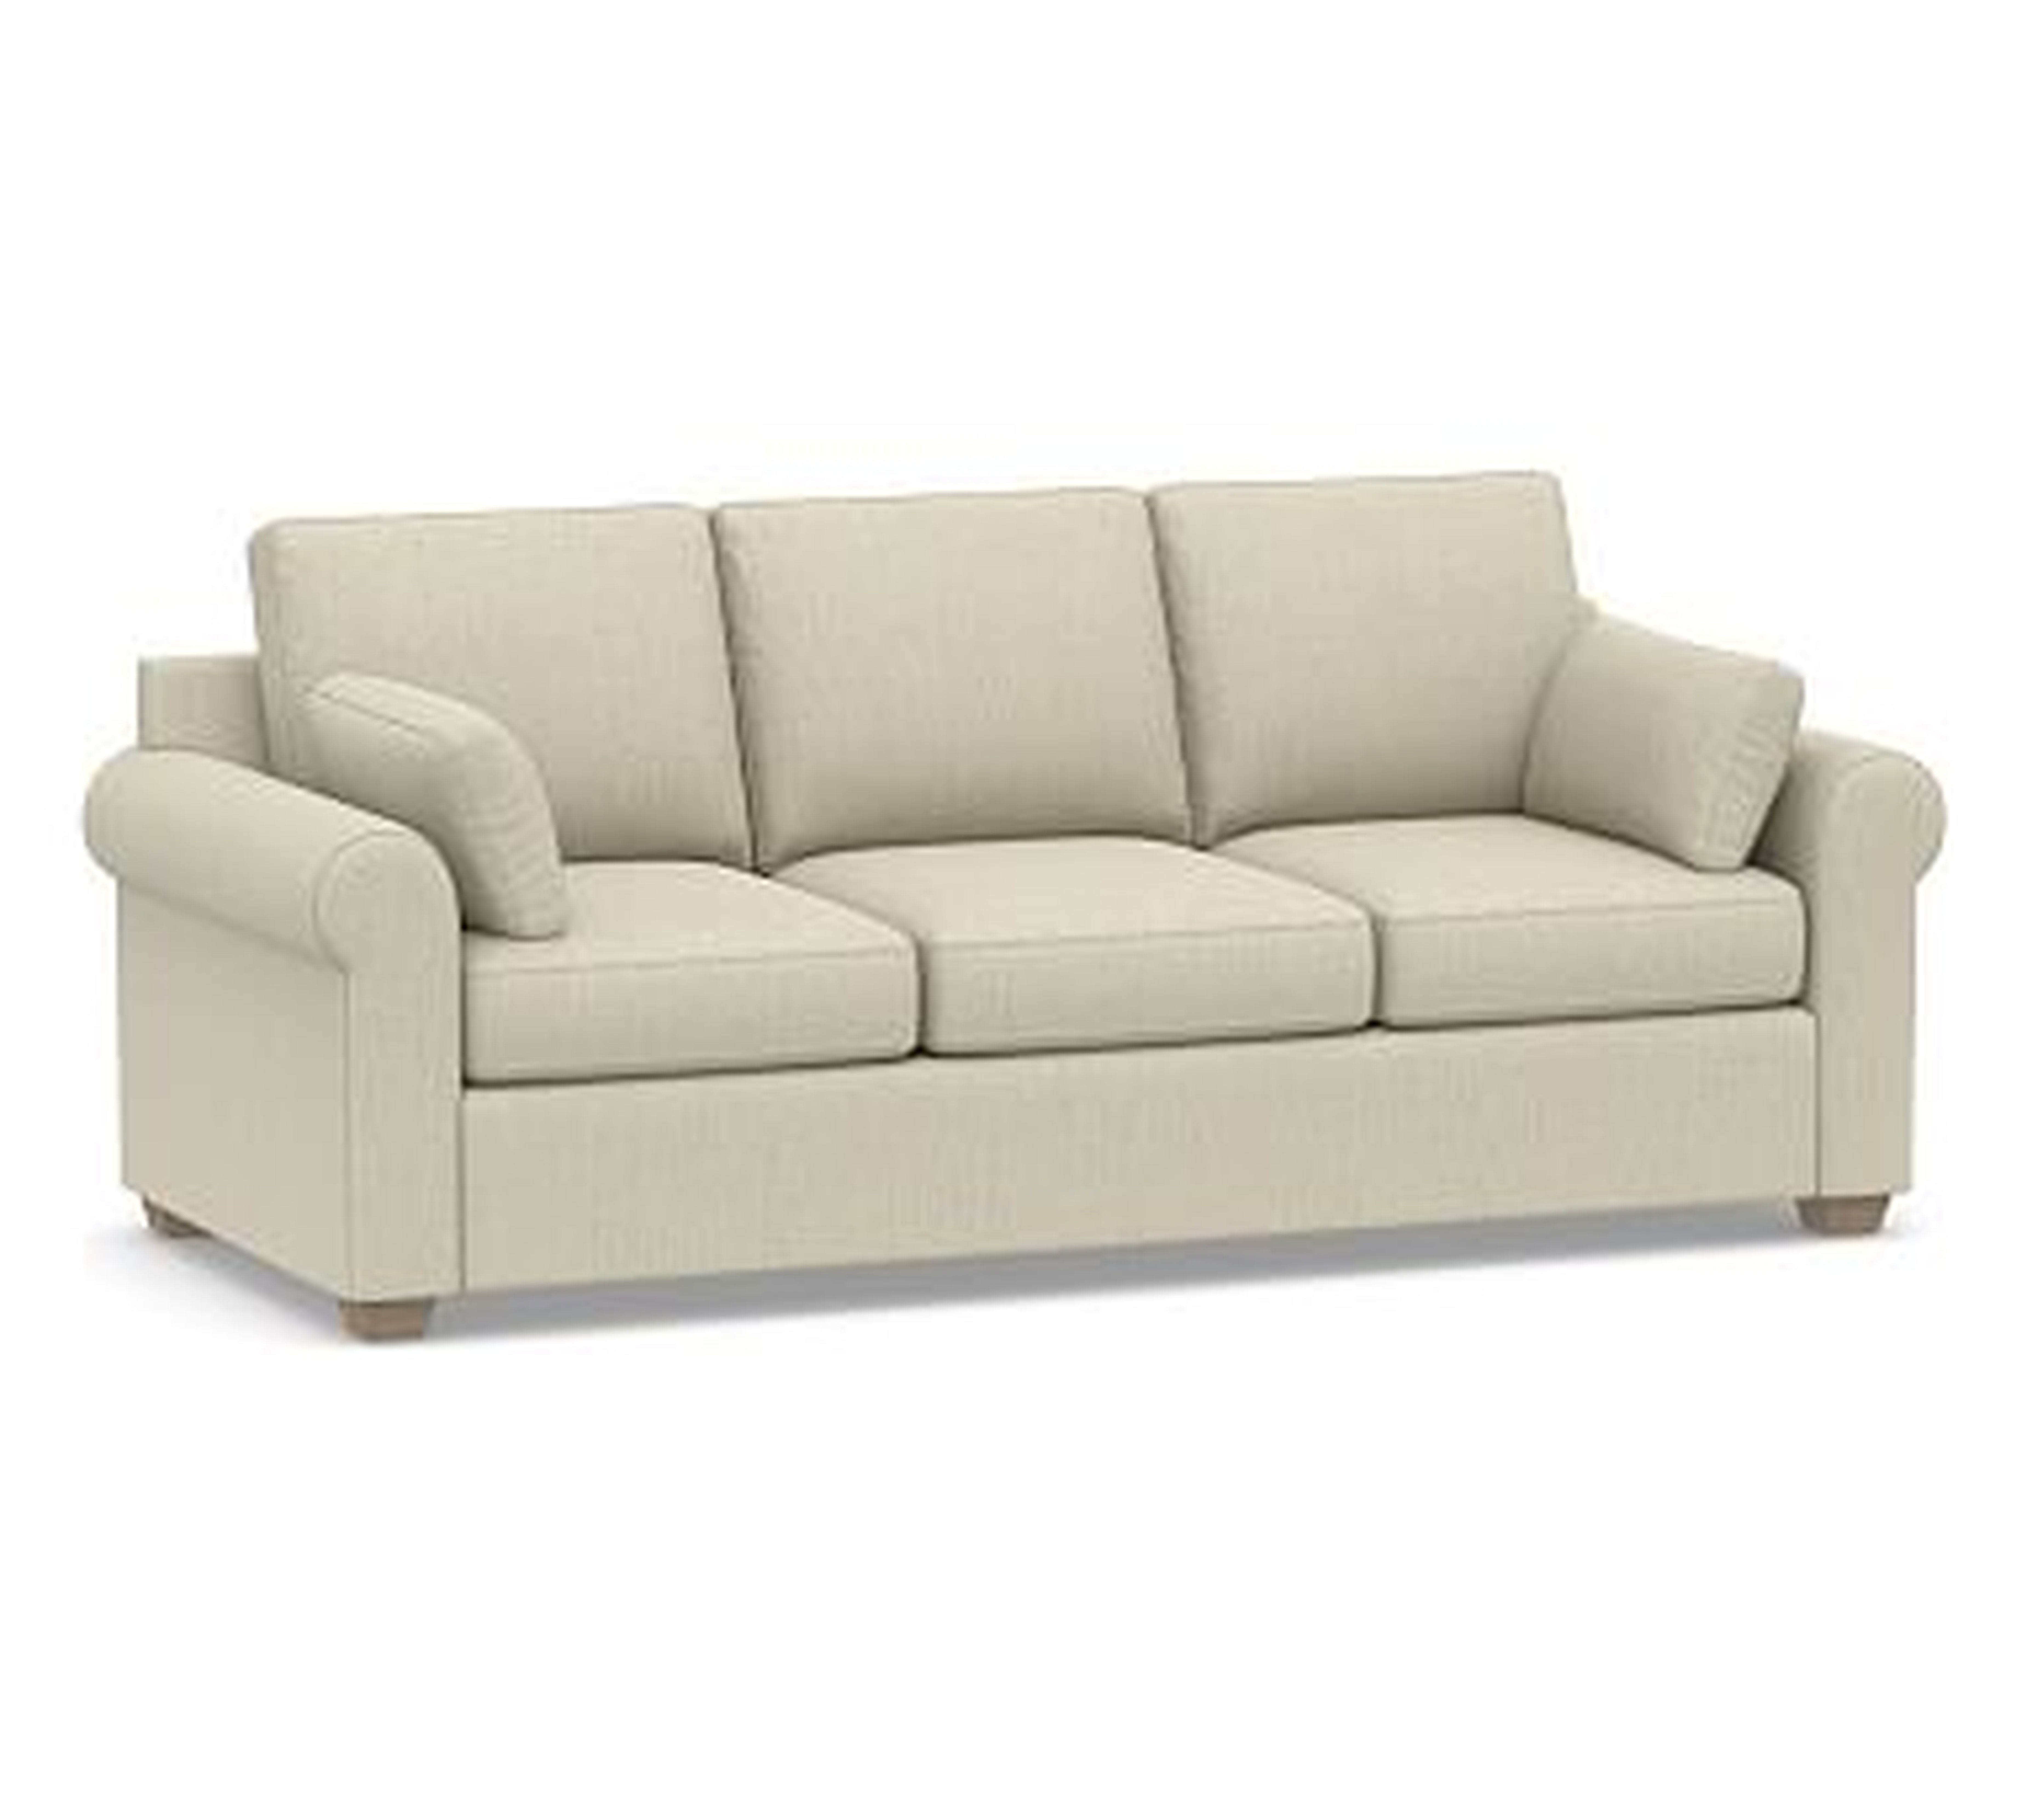 Jenner Roll Arm Upholstered Sofa 92", Down Blend Wrapped Cushions, Chenille Basketweave Oatmeal - Pottery Barn